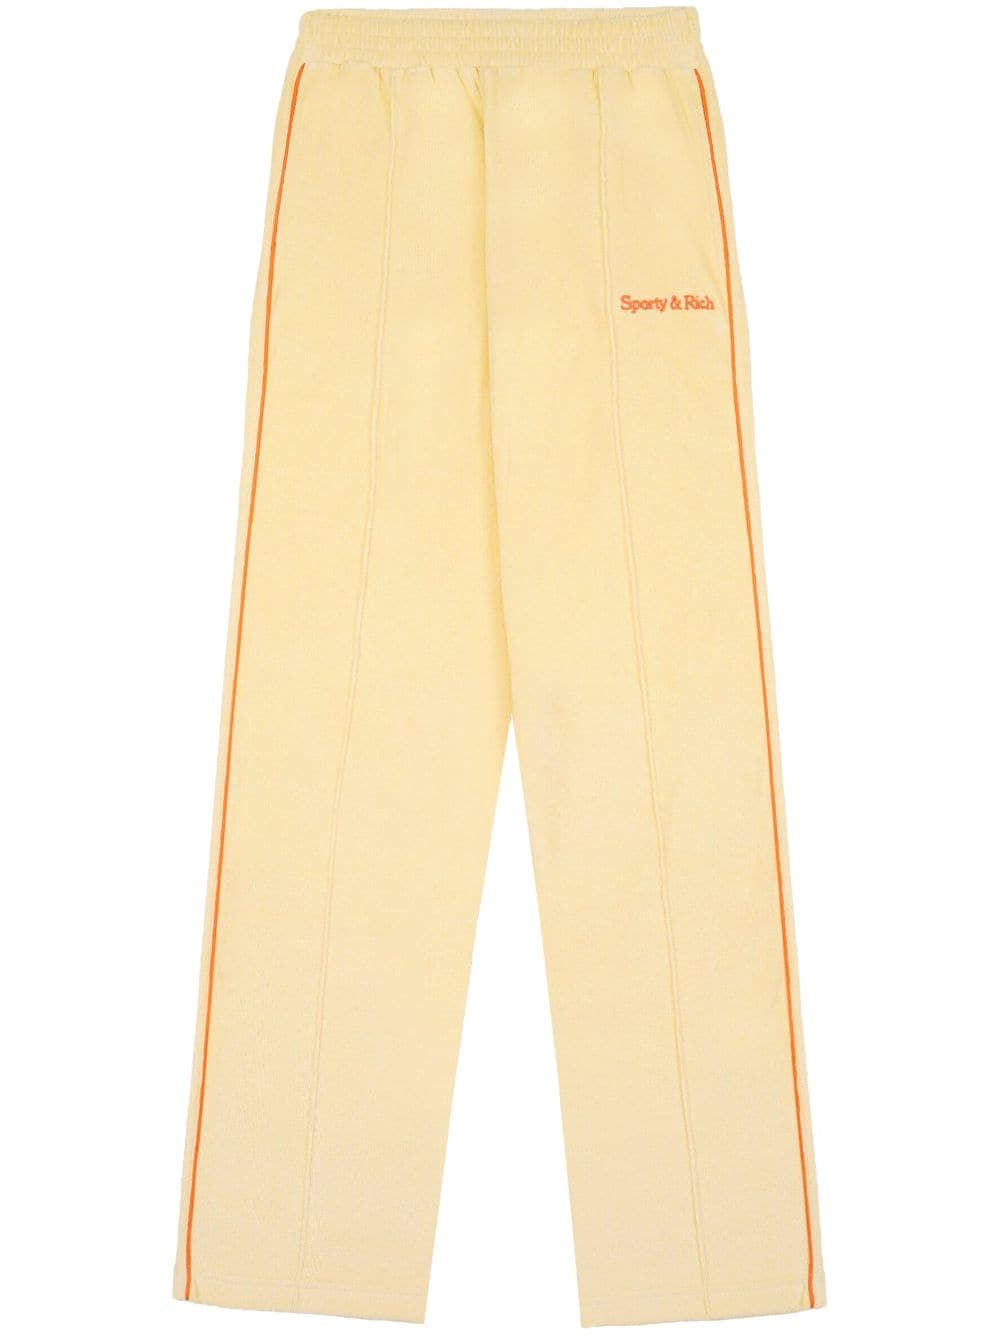 Sporty & Rich logo-embroidered terrycloth track pants - Yellow von Sporty & Rich